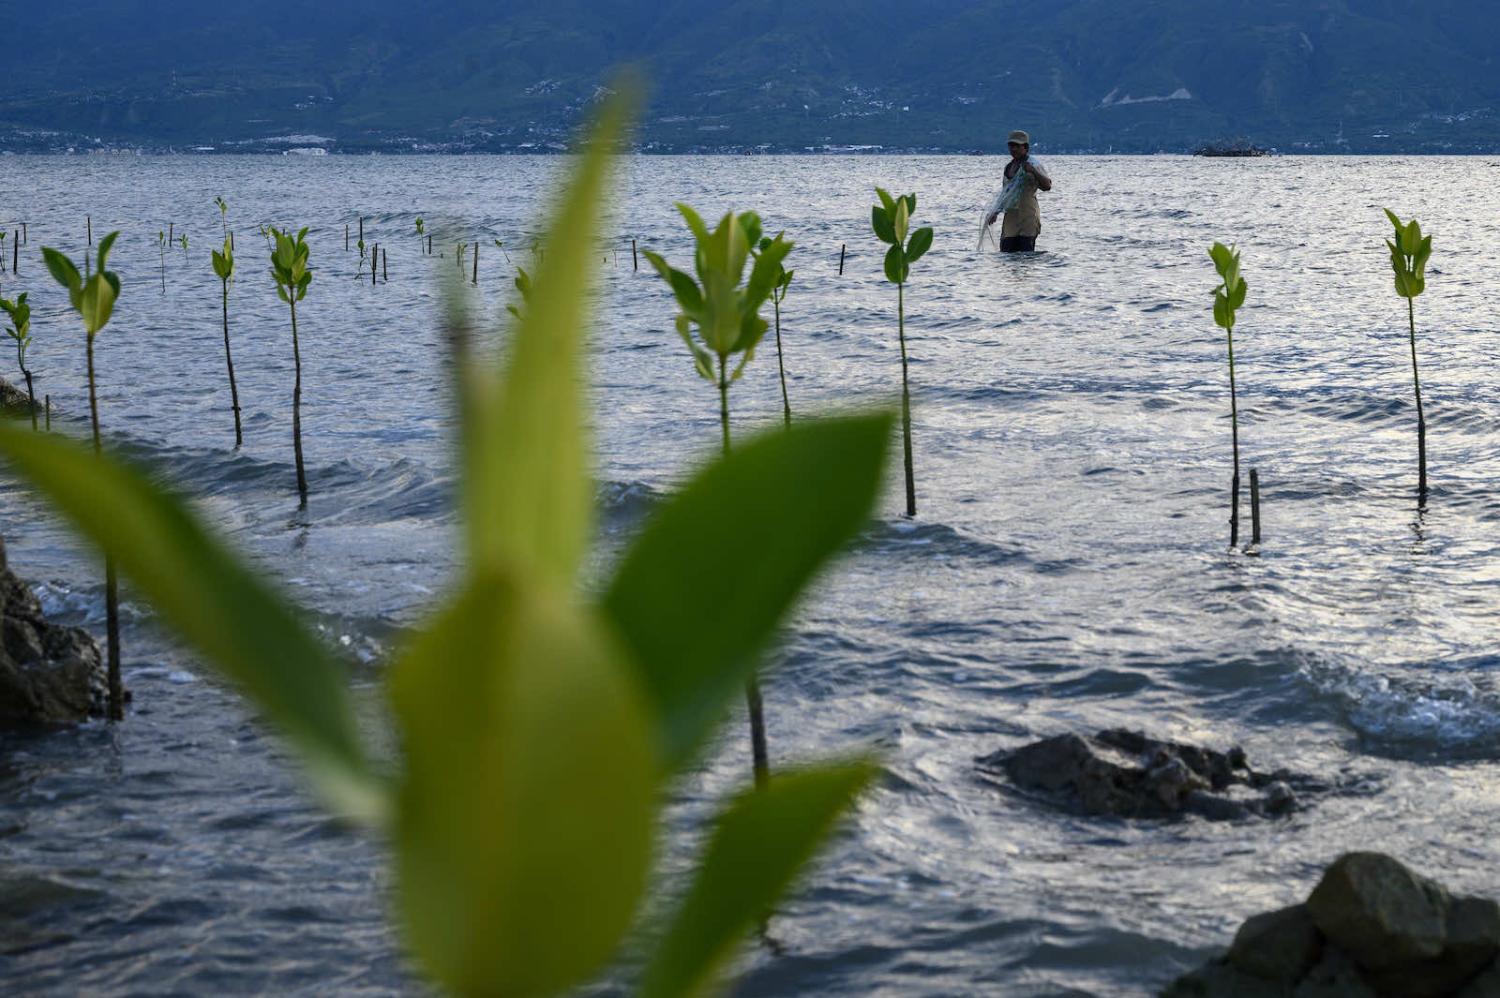 Mangroves planted in Palu City, Central Sulawesi, Indonesia, in a bid to stop widespread coastal abrasion following the 2018 earthquake and tsunami (Basri Marzuki/NurPhoto via Getty Images)